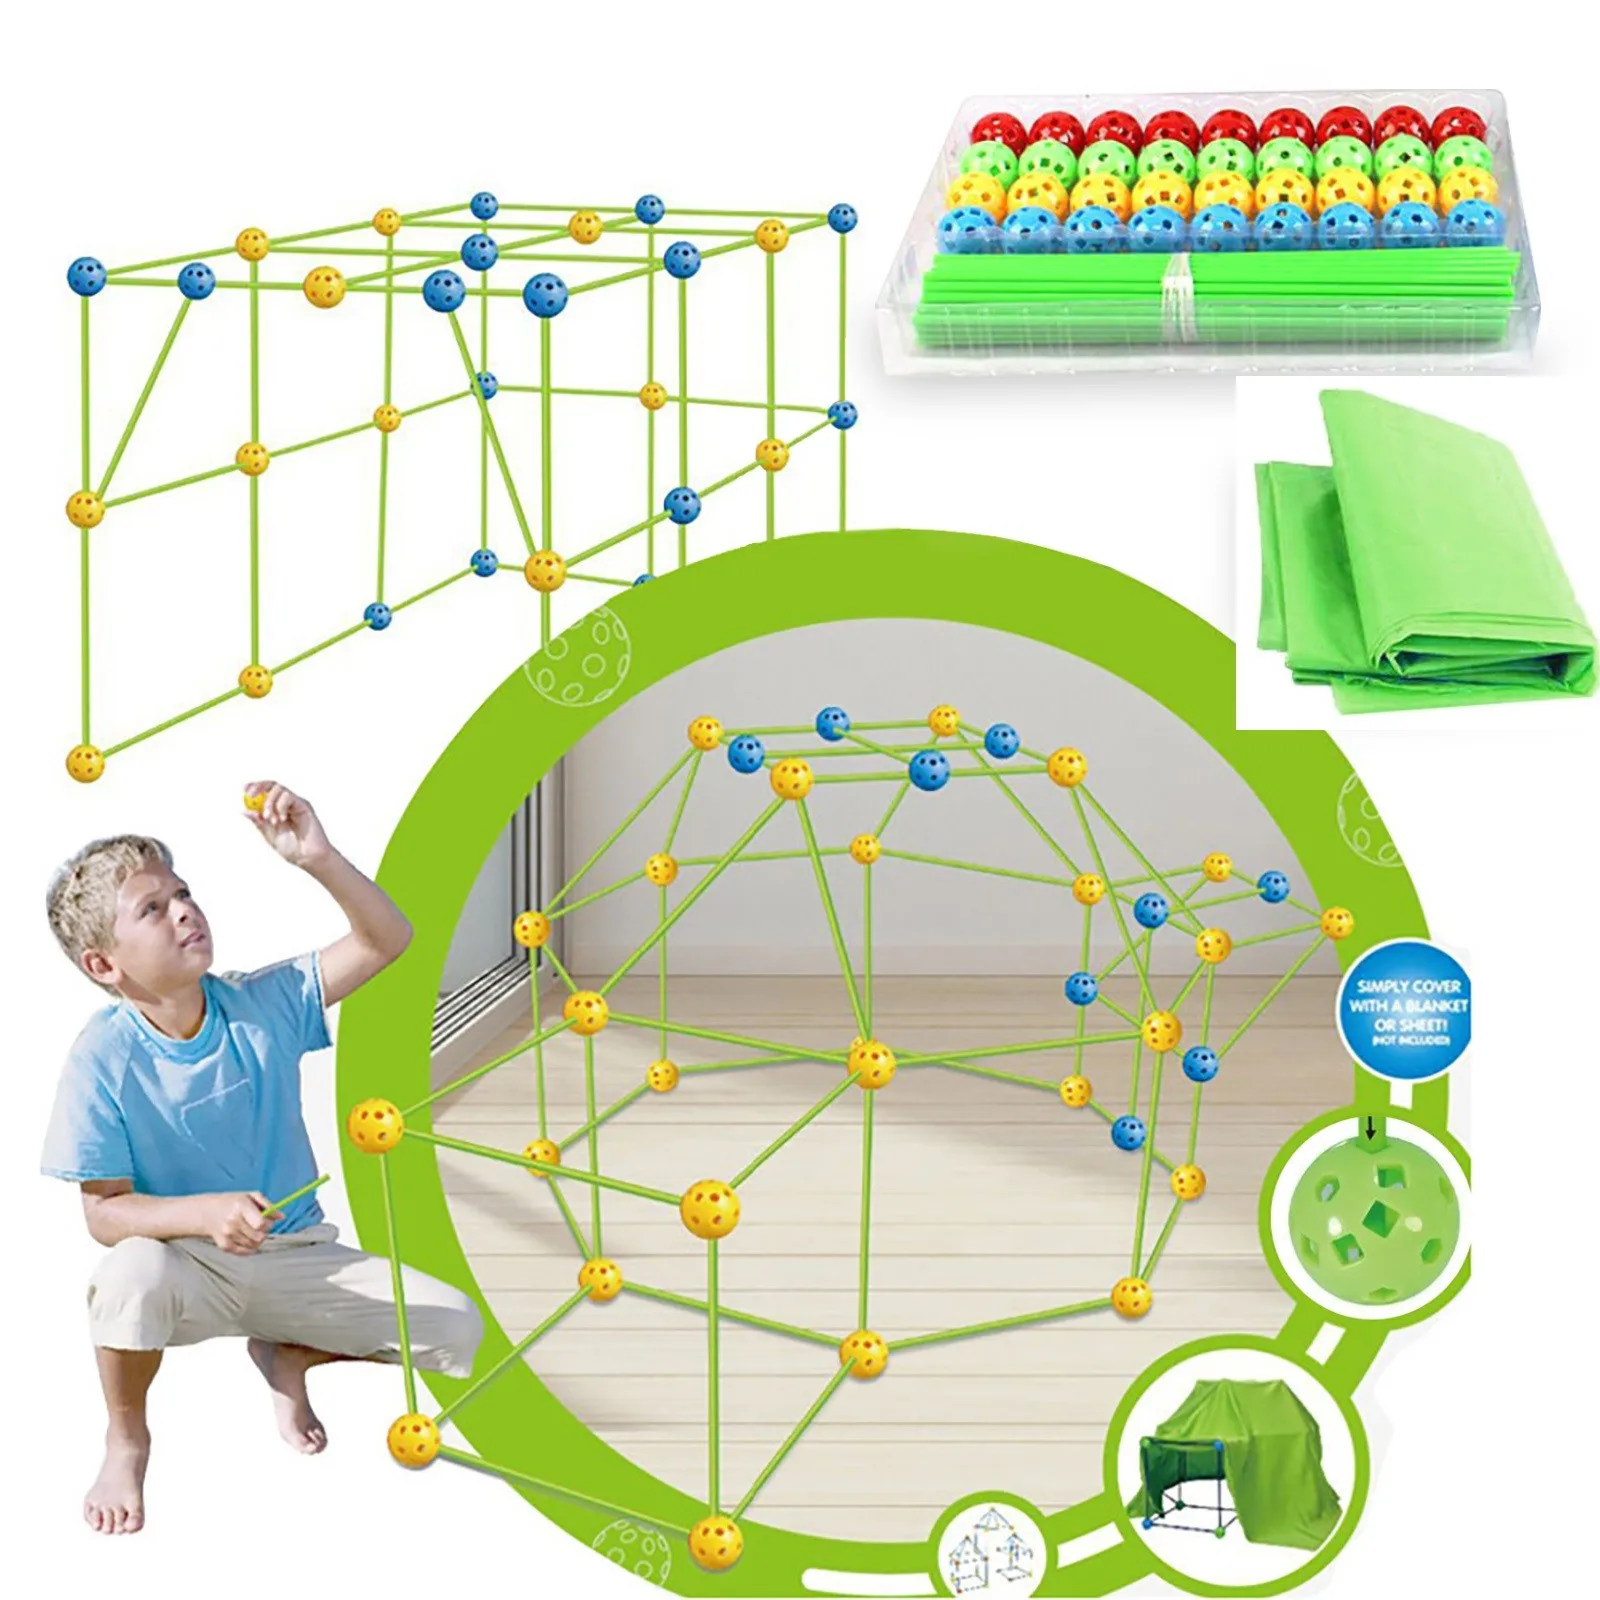 

Kids Construction Fort Building Castles Tunnels Children's Tent Kit DIY 3D Play House Toys Tents for Boys Girls Christmas Gift